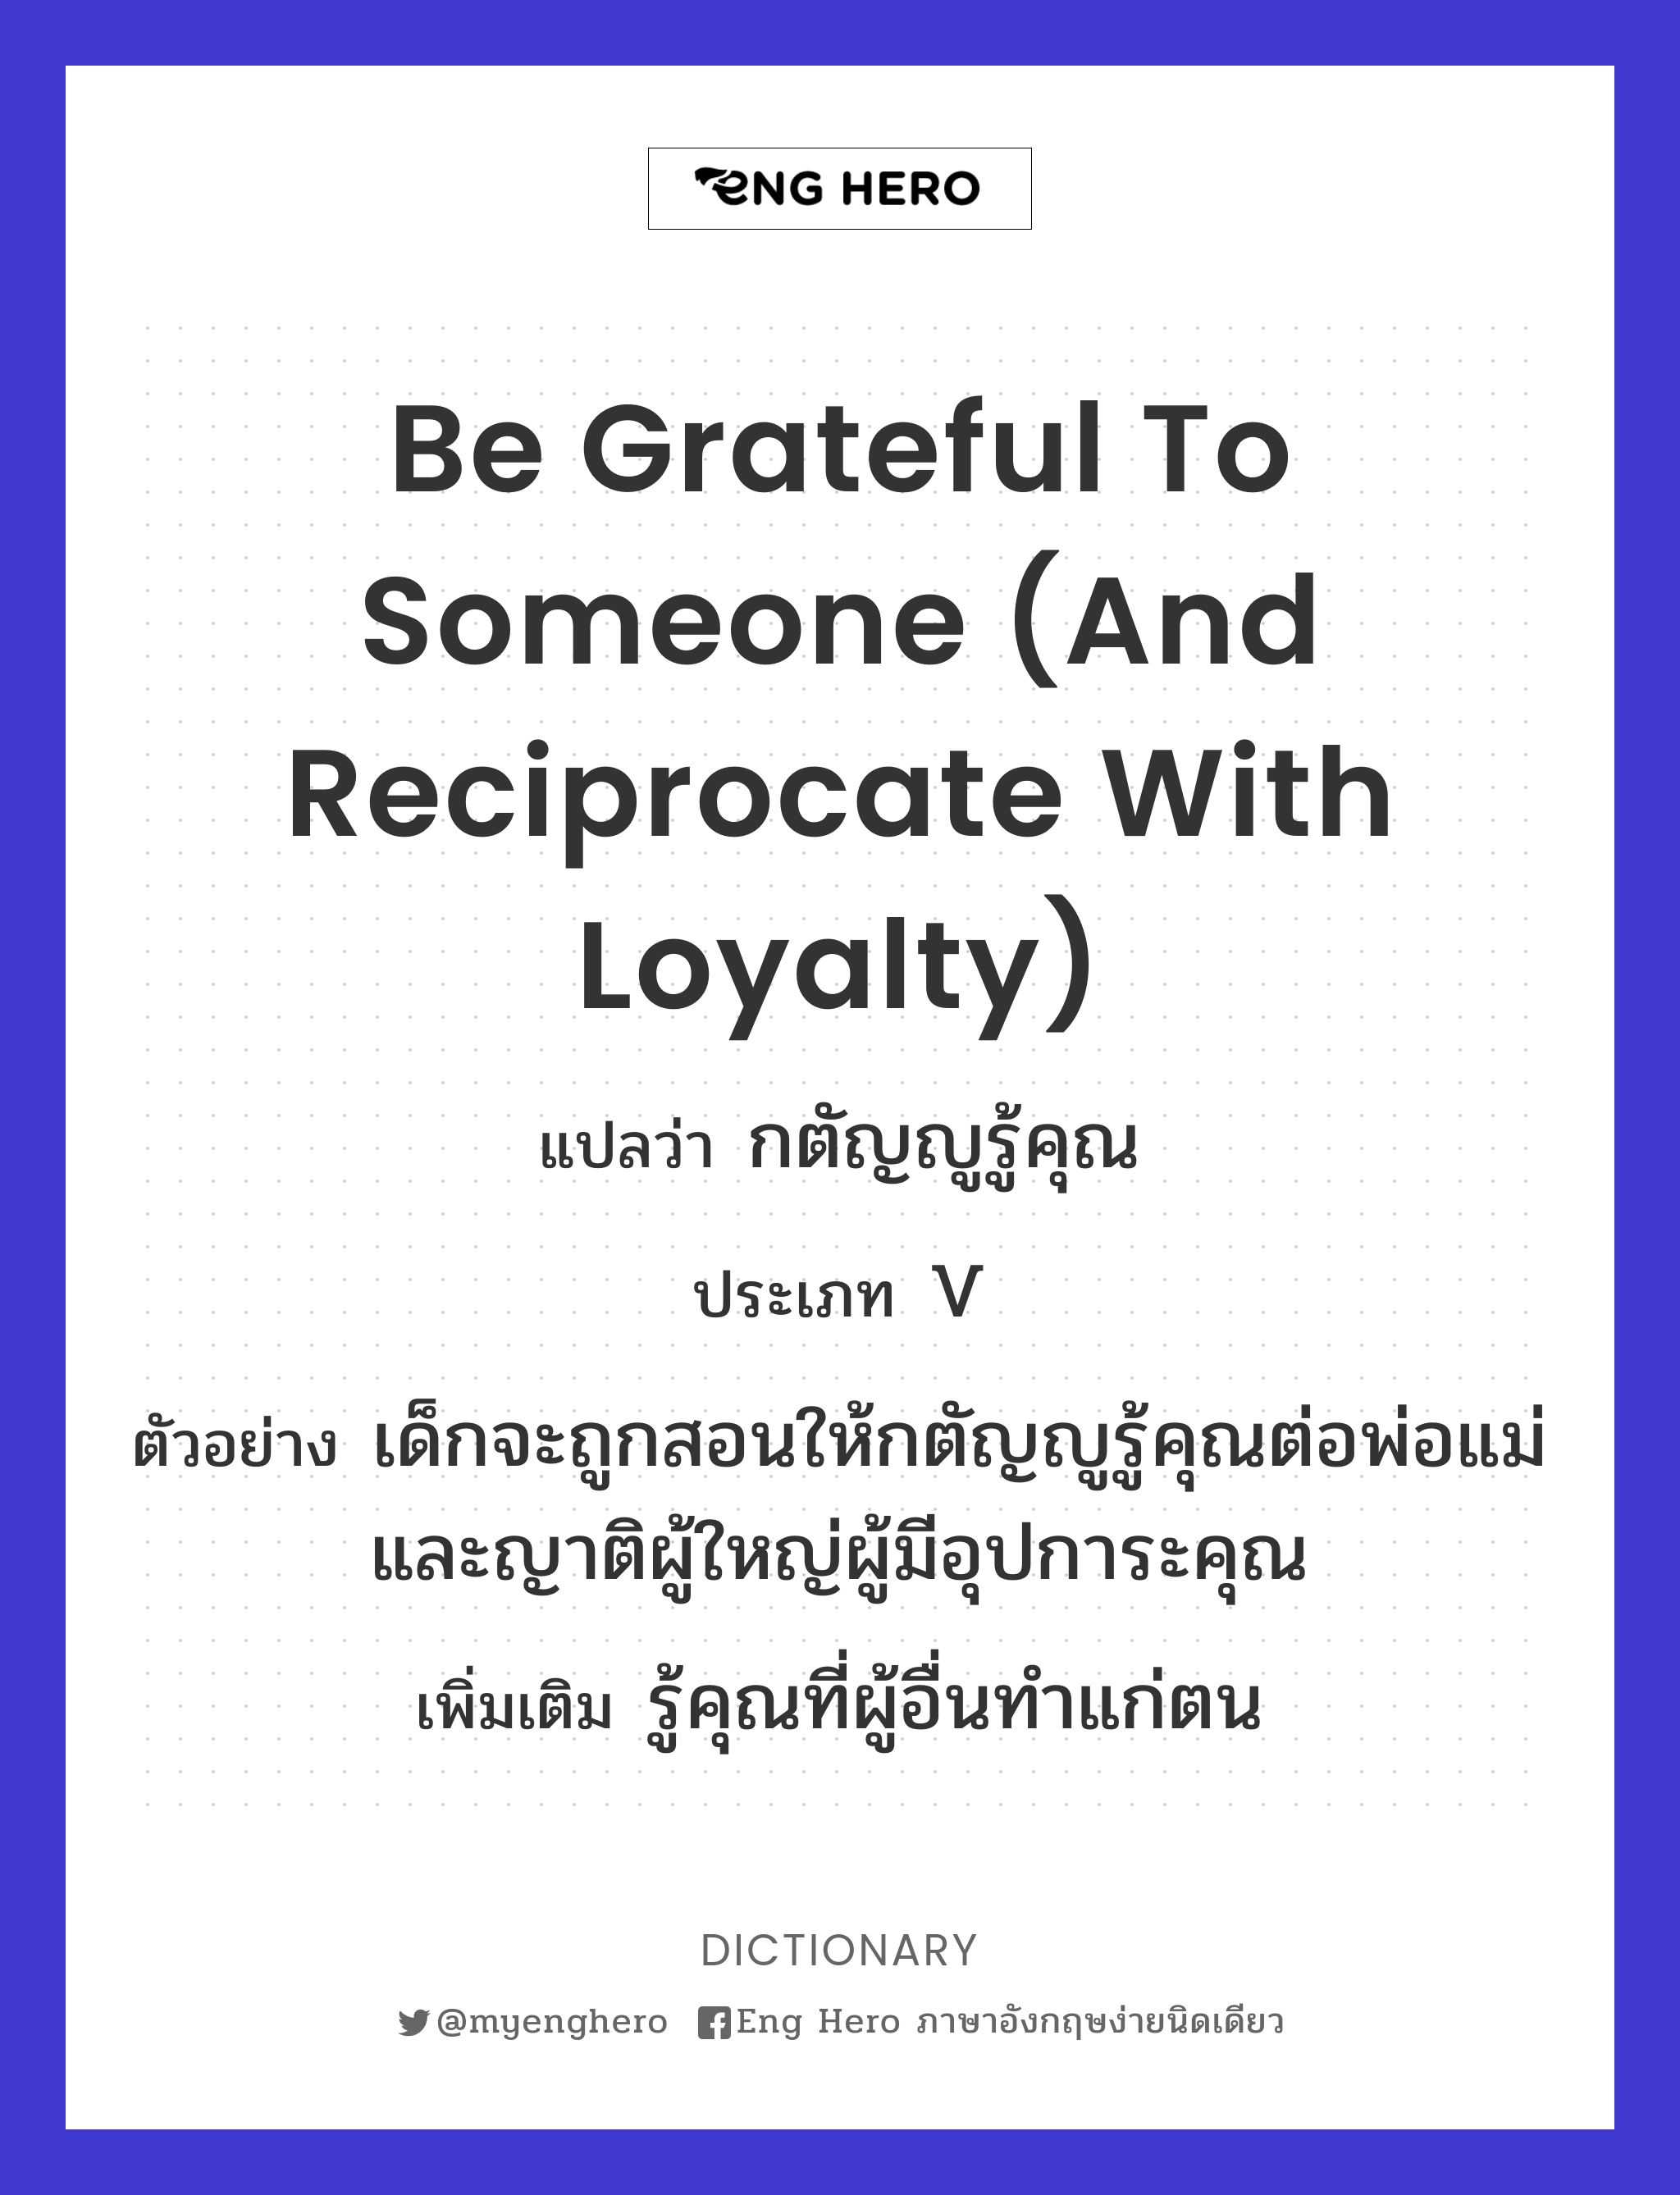 be grateful to someone (and reciprocate with loyalty)